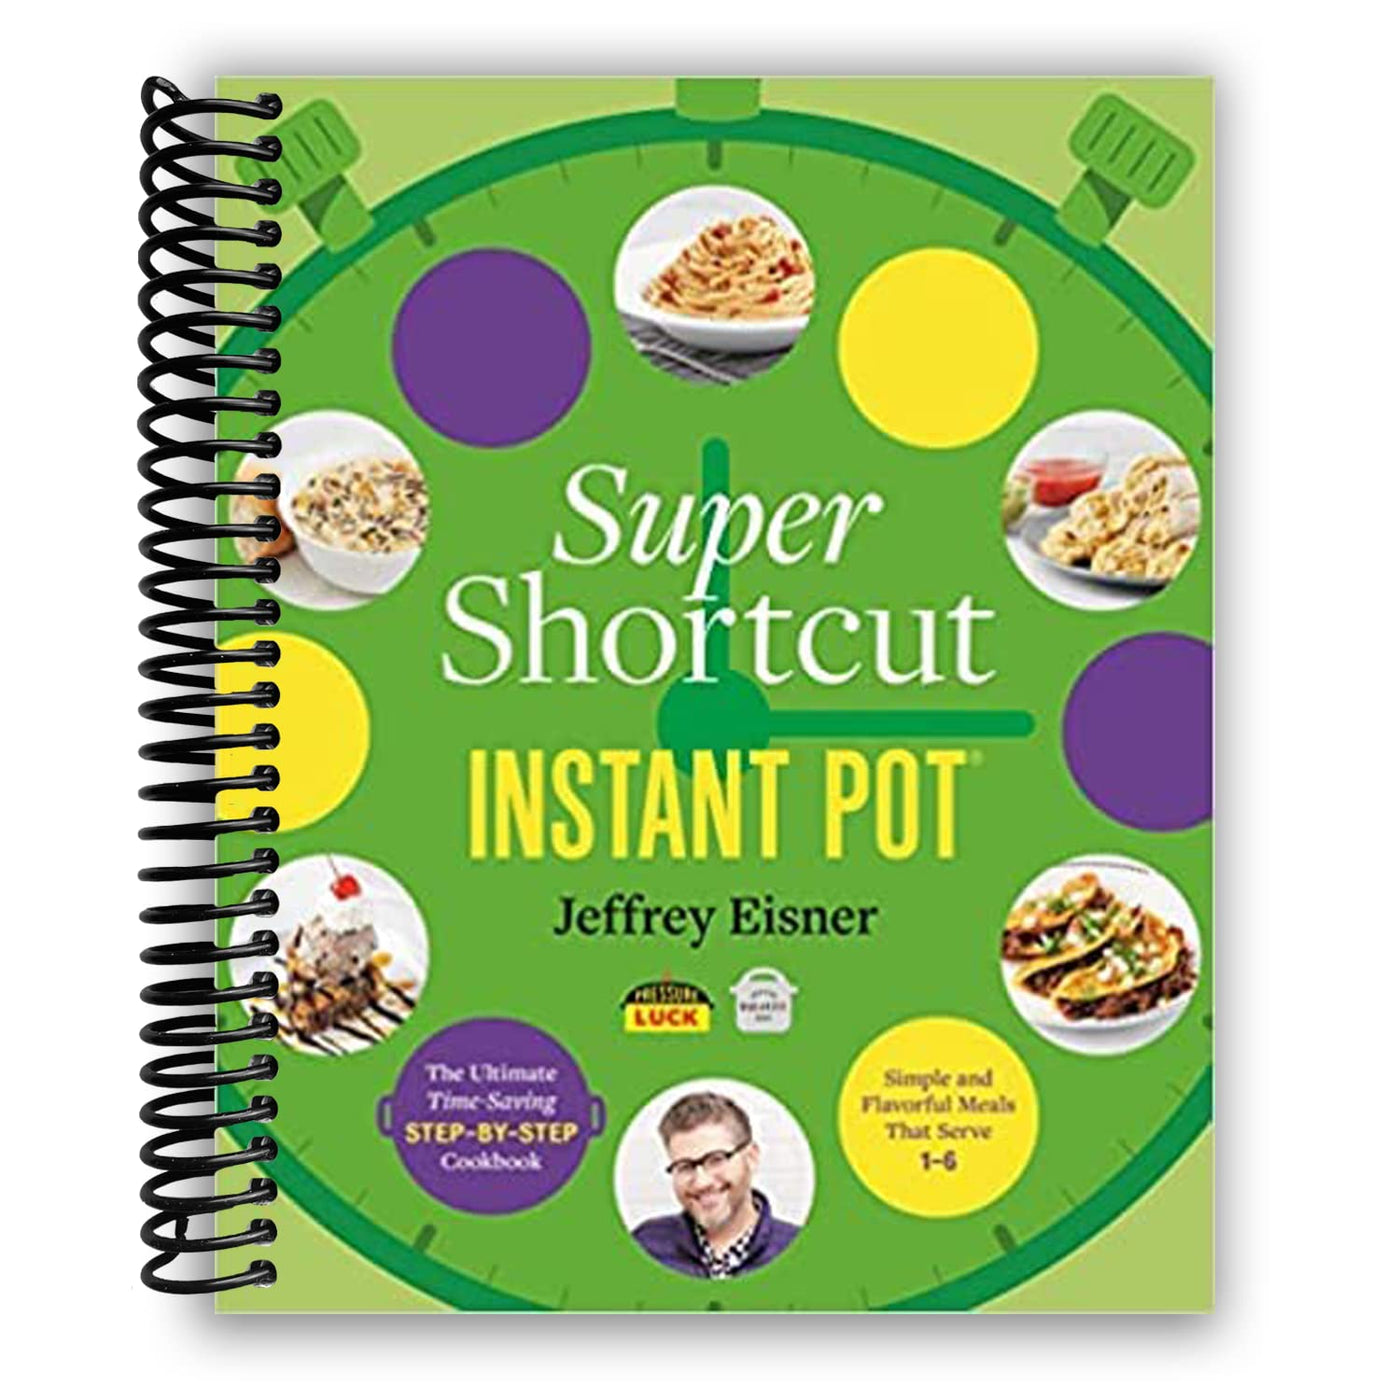 Super Shortcut Instant Pot: The Ultimate Time-Saving Step-by-Step Cookbook (Spiral Bound)